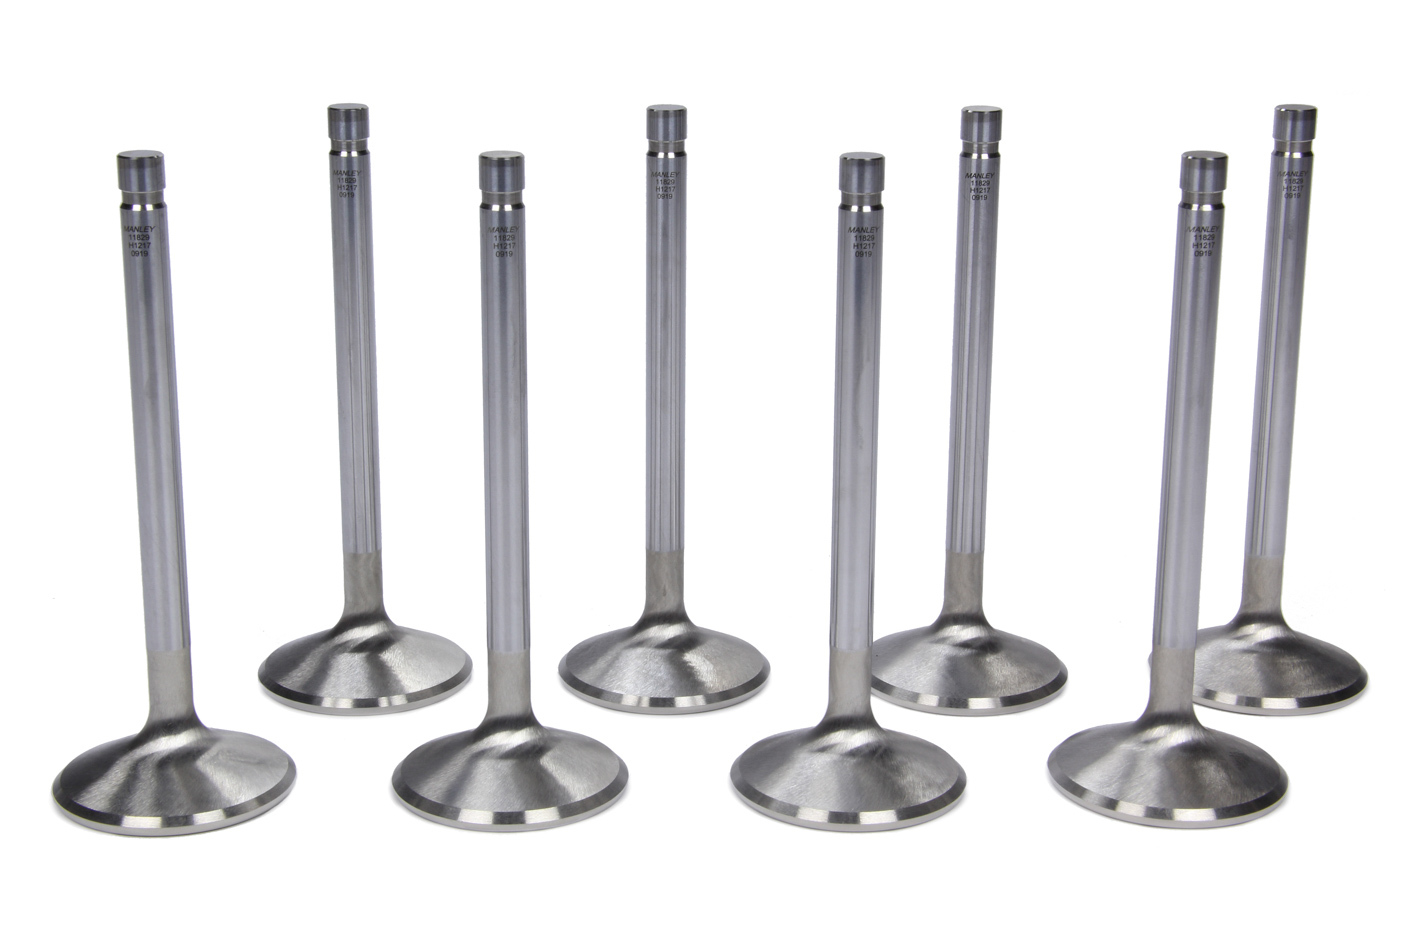 Manley 11829-8 Exhaust Valve, Race Master, 1.880 in Head, 0.3415 in Valve Stem, 5.070 in Long, Stainless, Big Block Ford, Set of 8